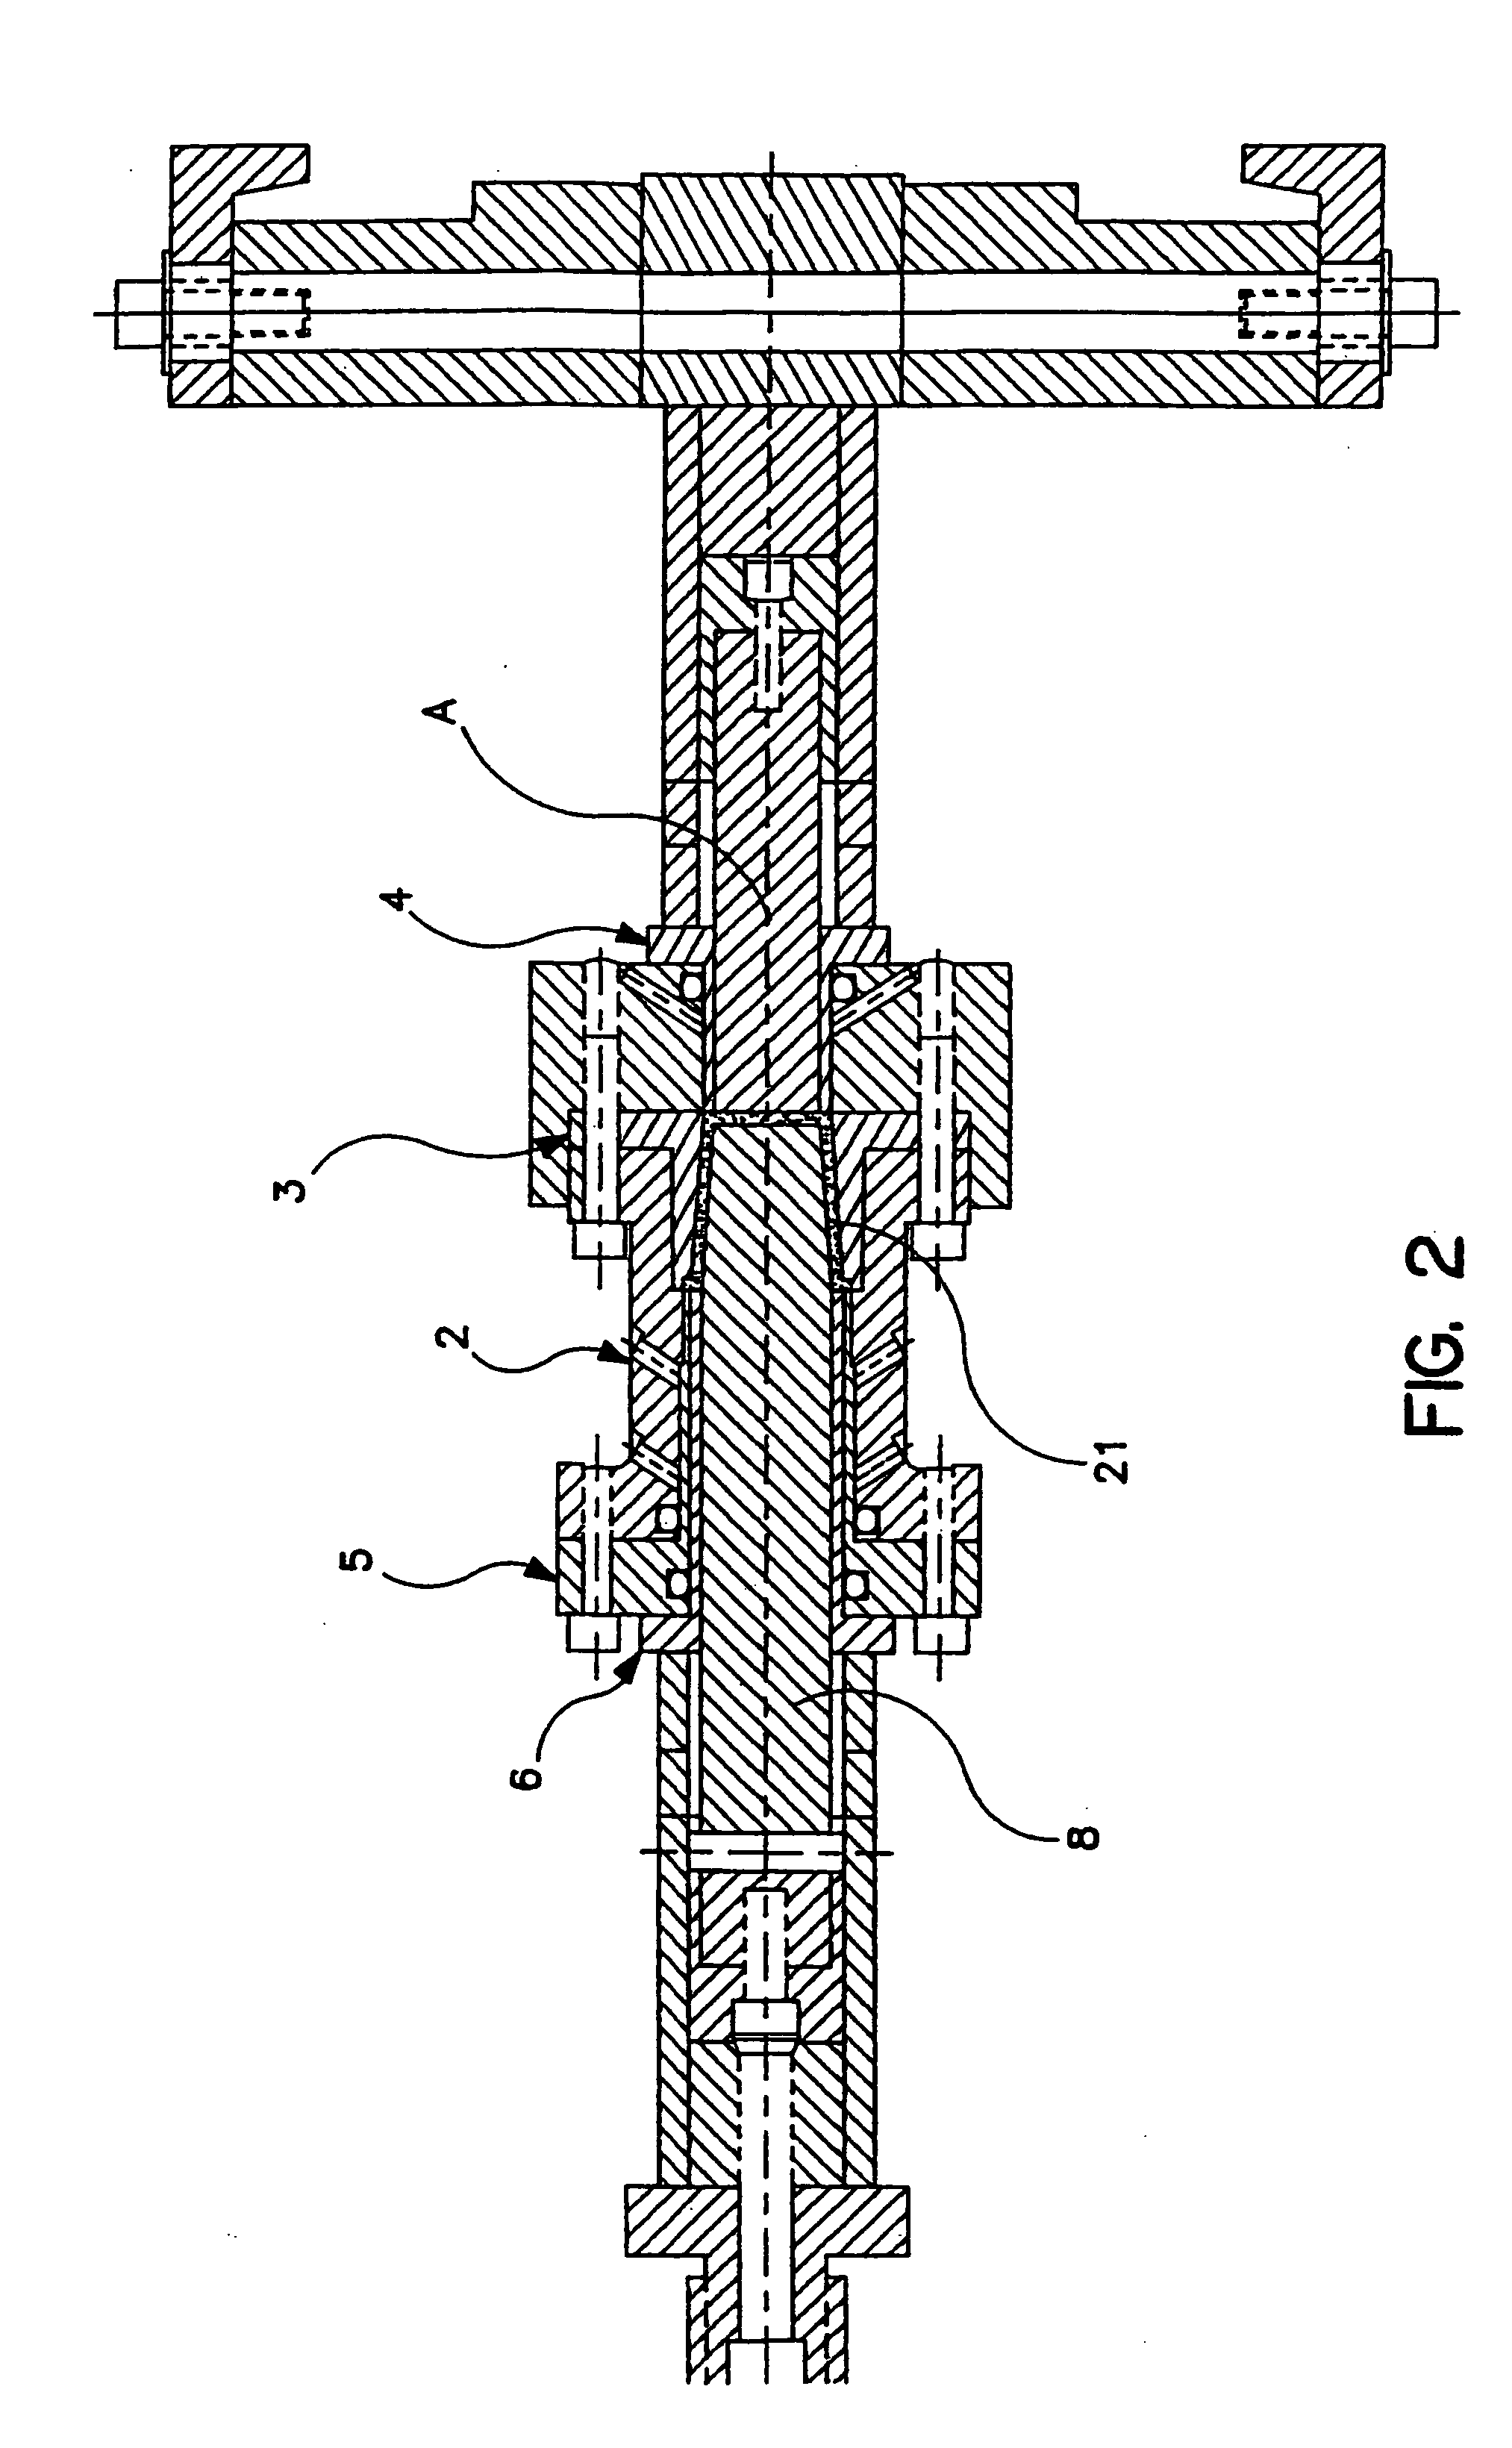 Porous structures and methods for forming porous structures